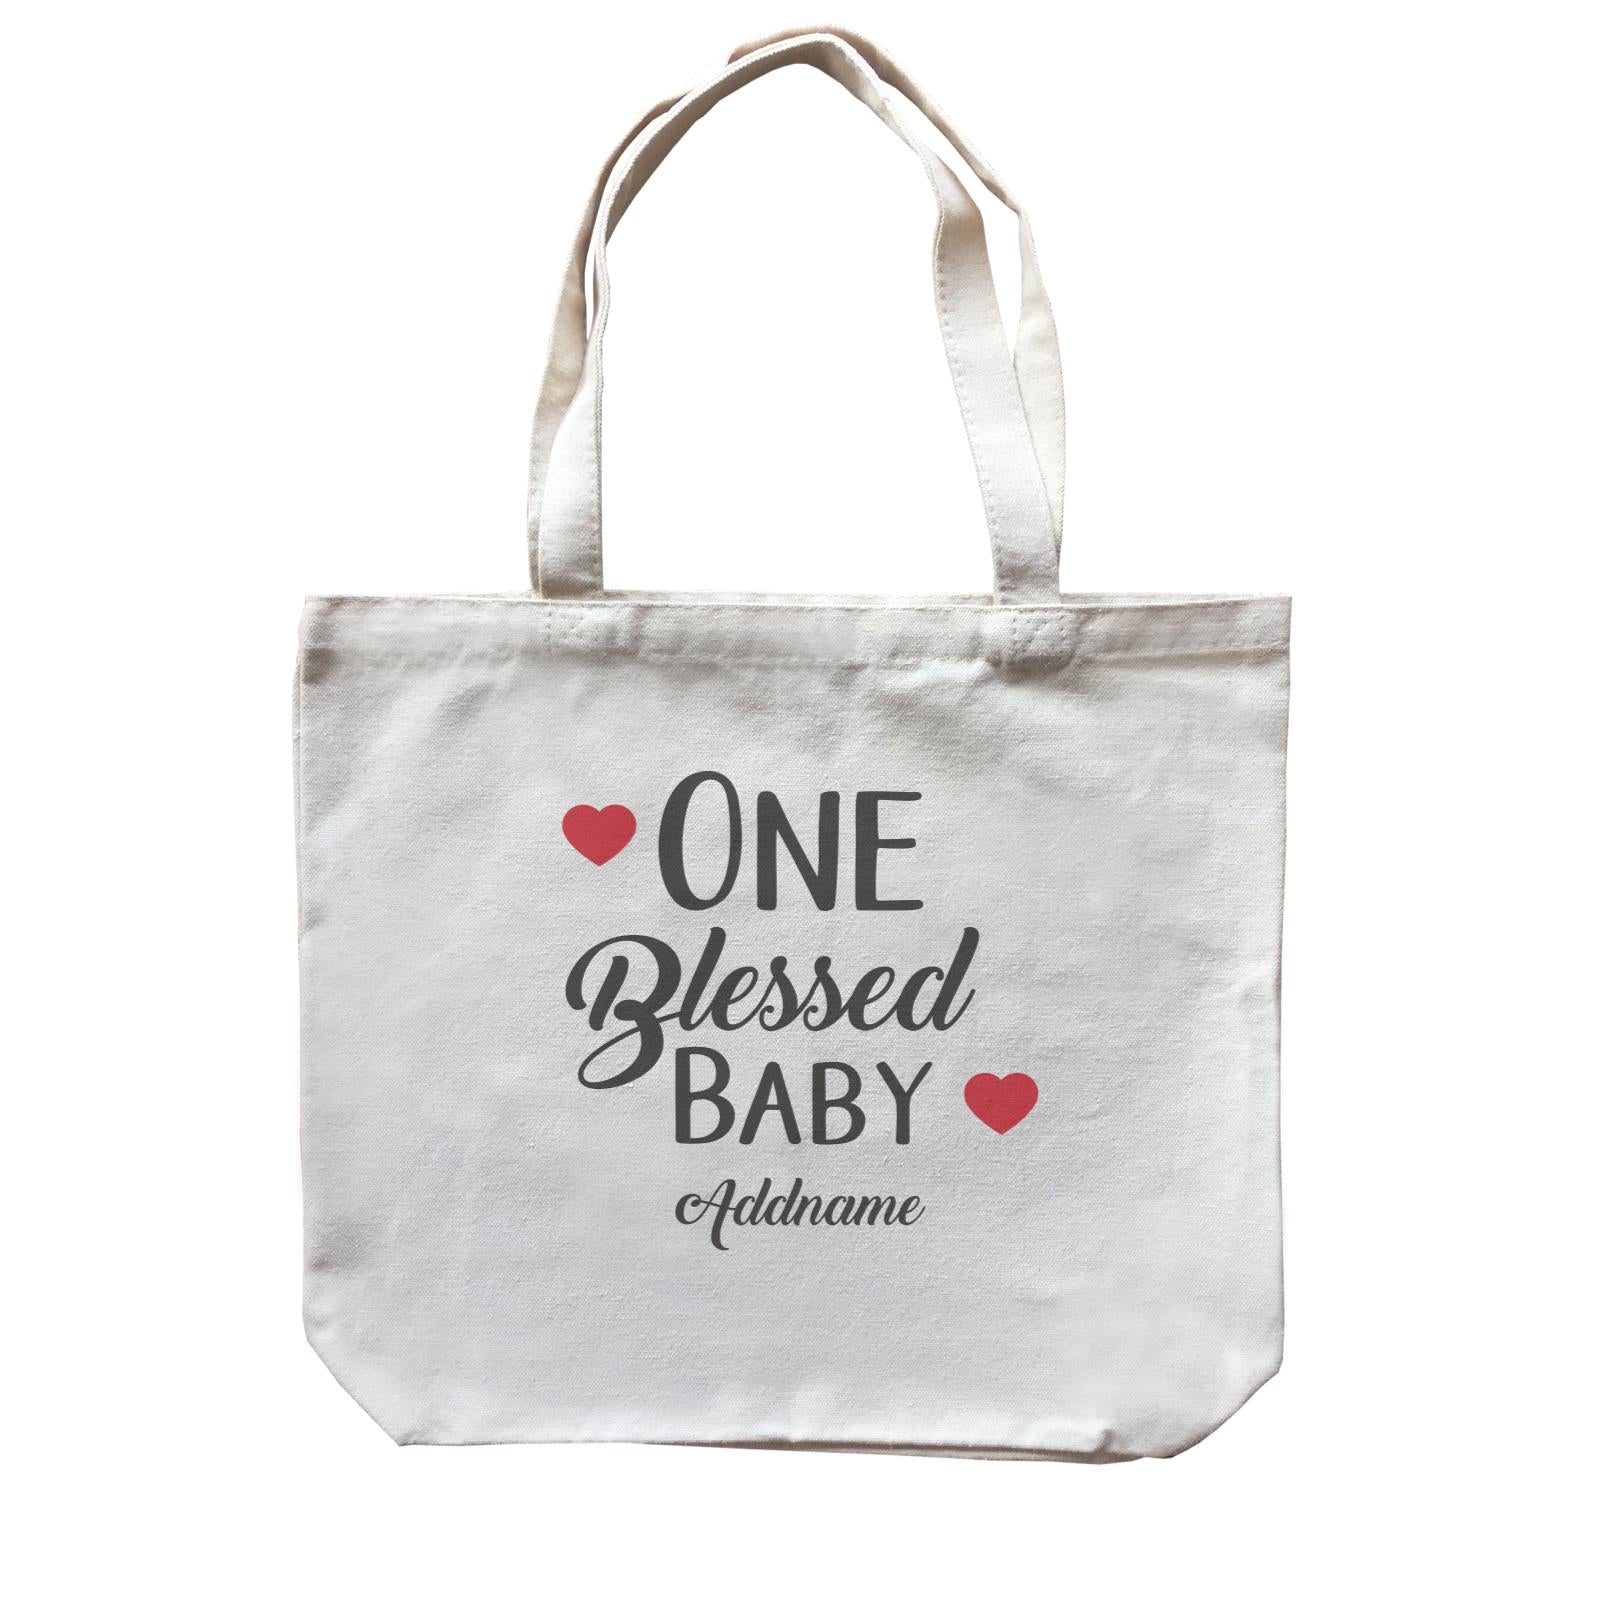 Christian Series One Blessed Baby Addname Canvas Bag